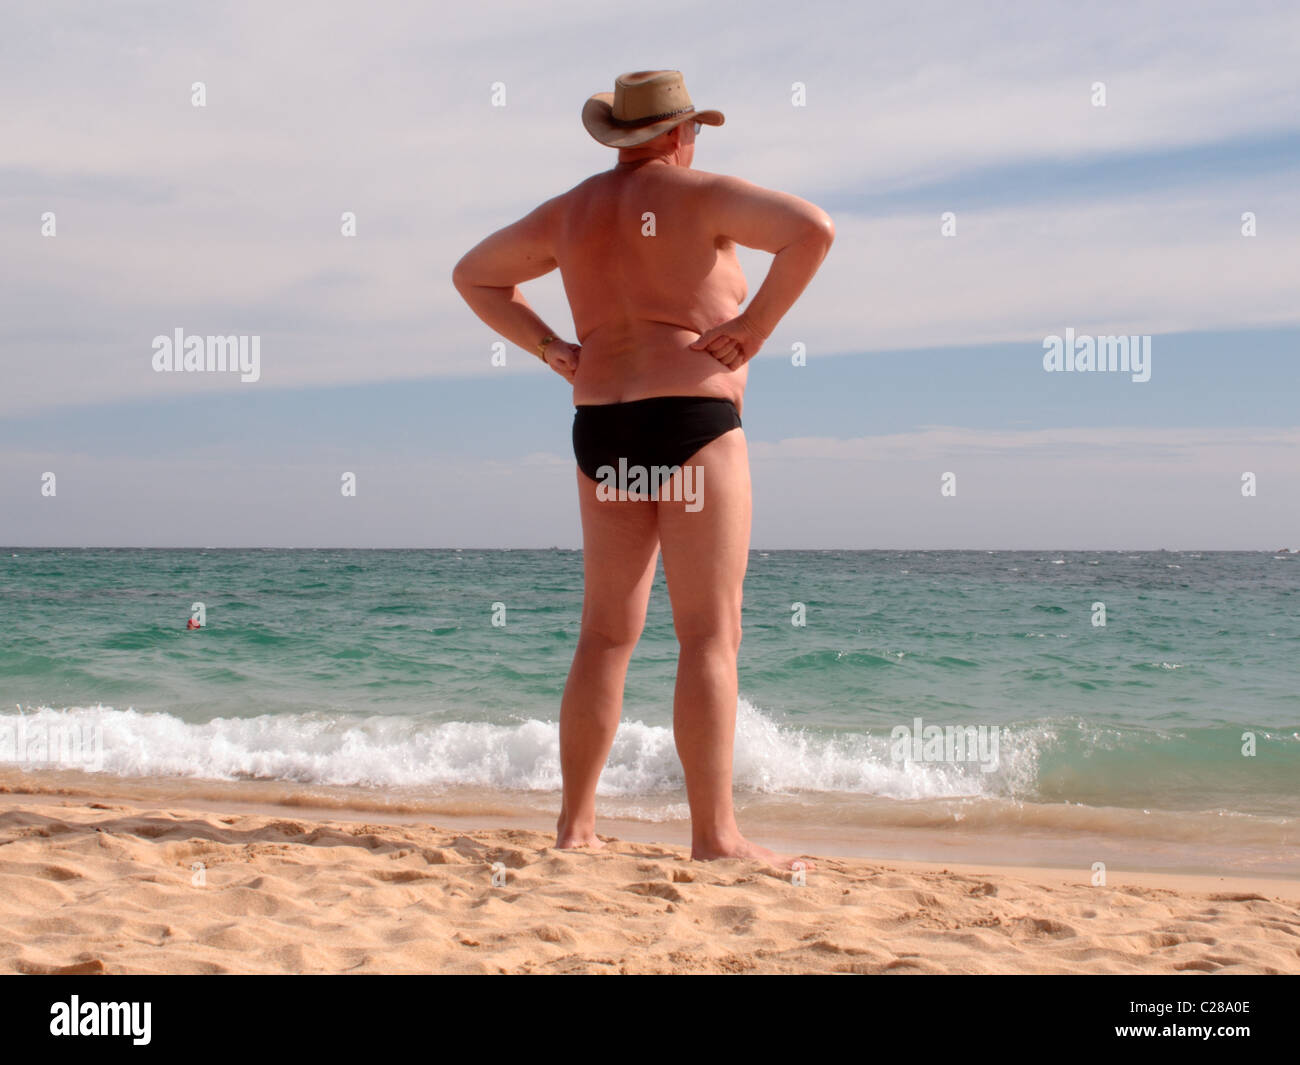 Man Speedos Beach High Resolution Stock Photography and Images - Alamy